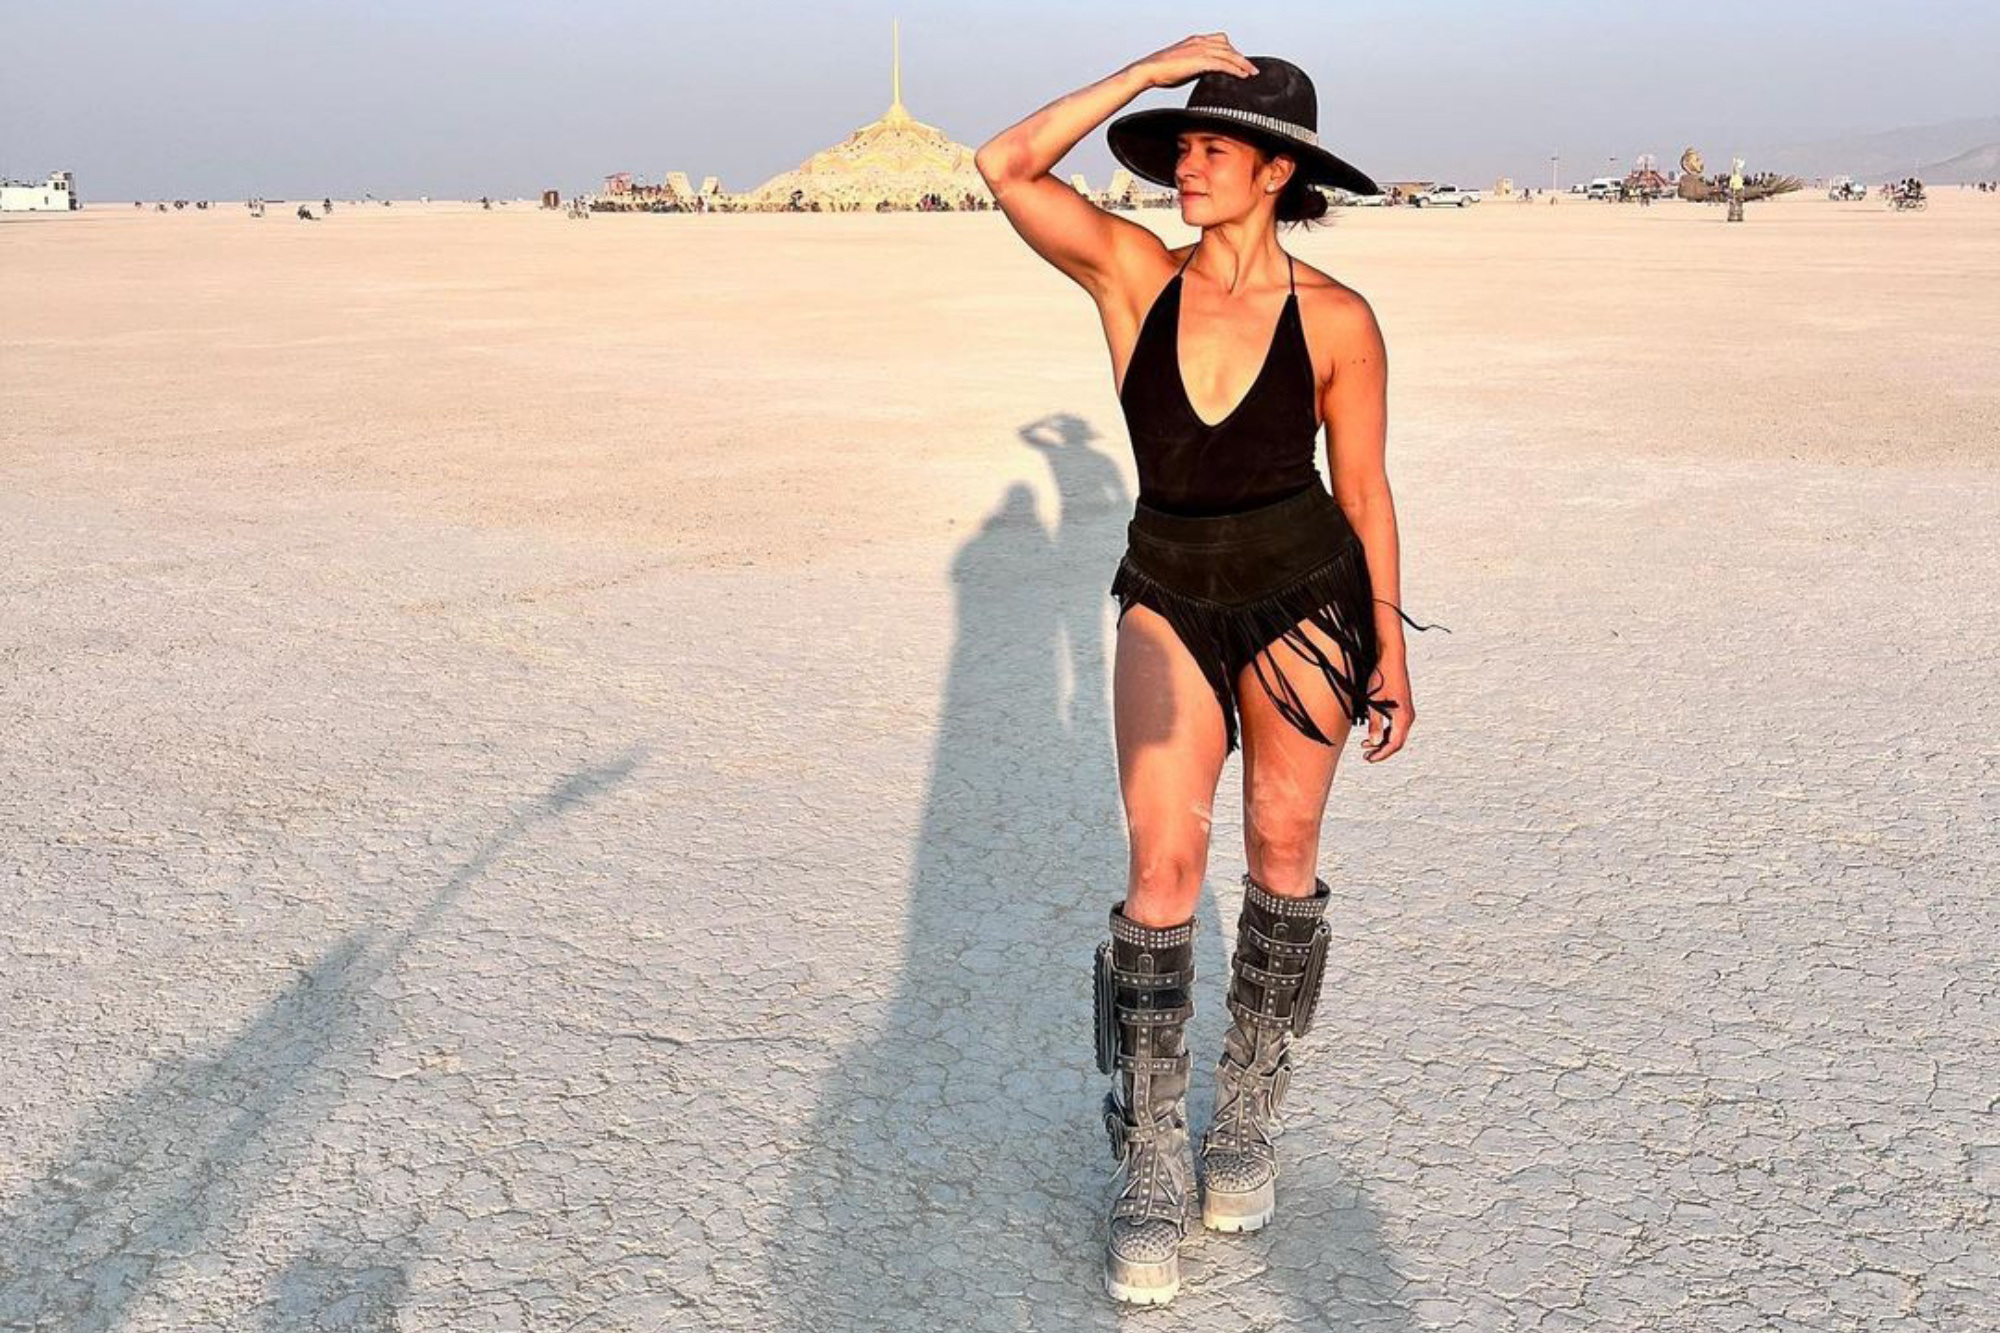 Danica Patrick Reflects on ‘Beyond Memorable’ Burning Man Experience